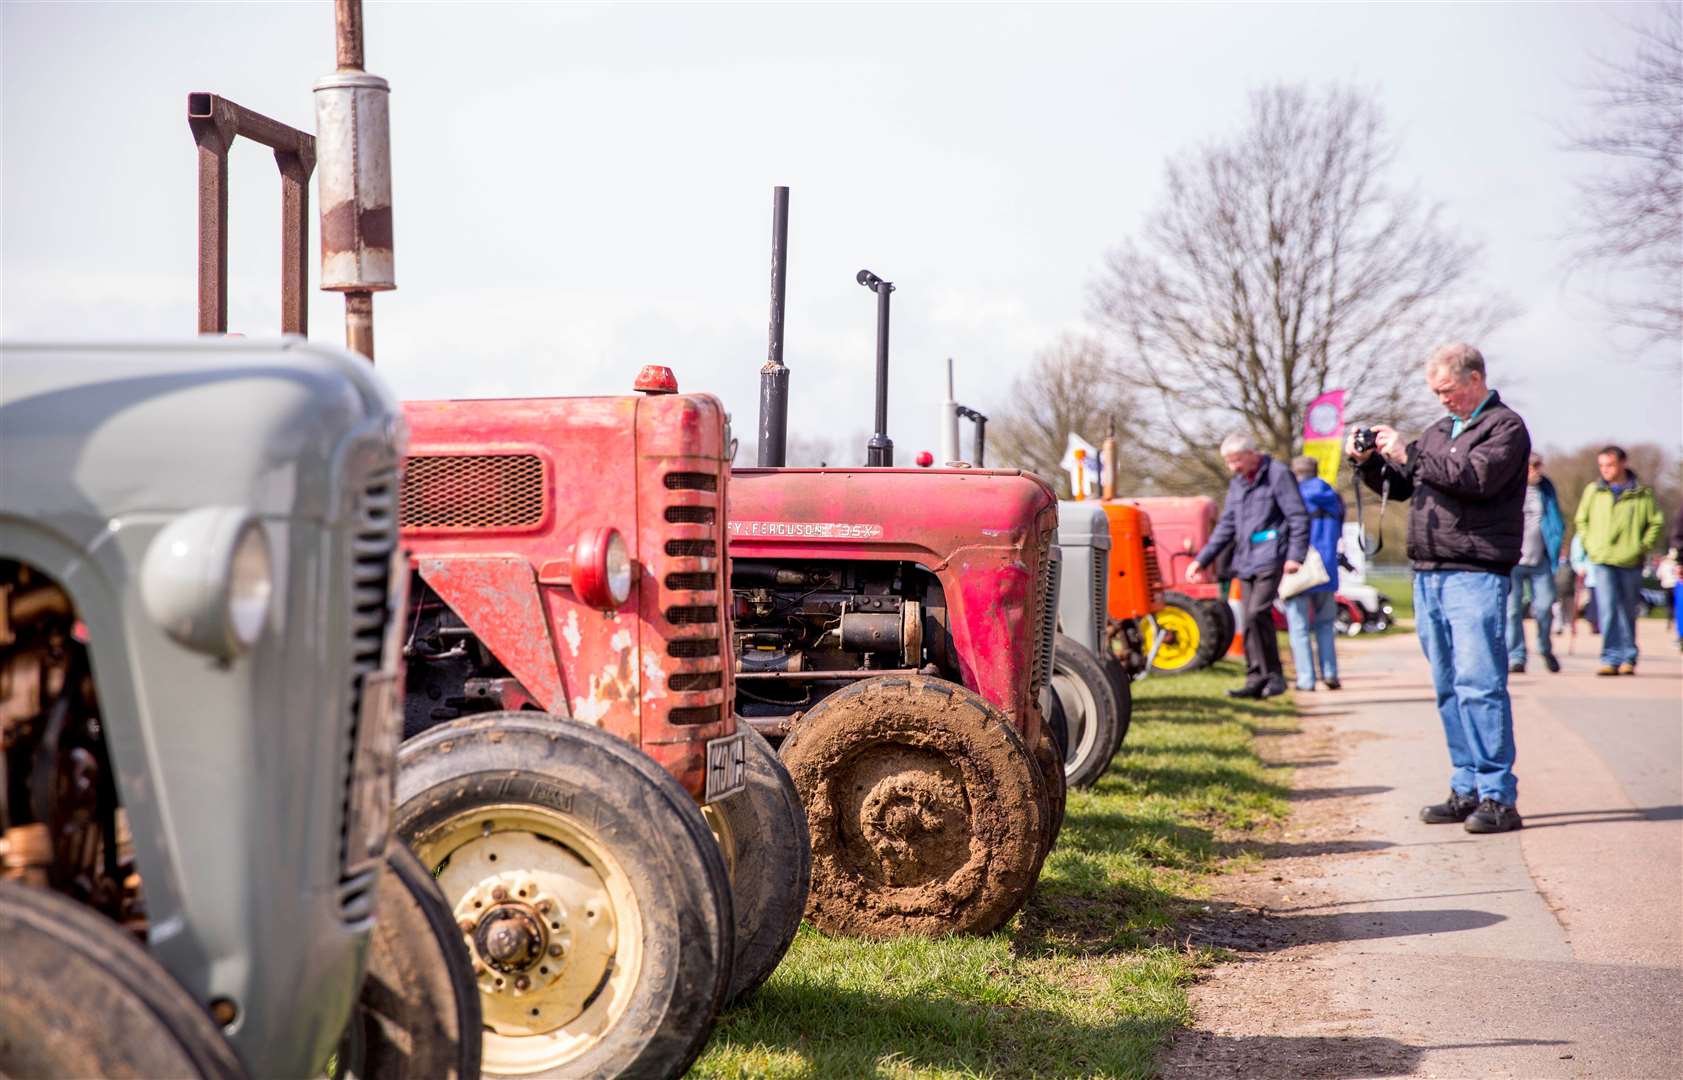 This year’s Heritage Transport Show will have everything from vintage sports cars to tractors and commercial vehicles. Picture: Thomas Alexander